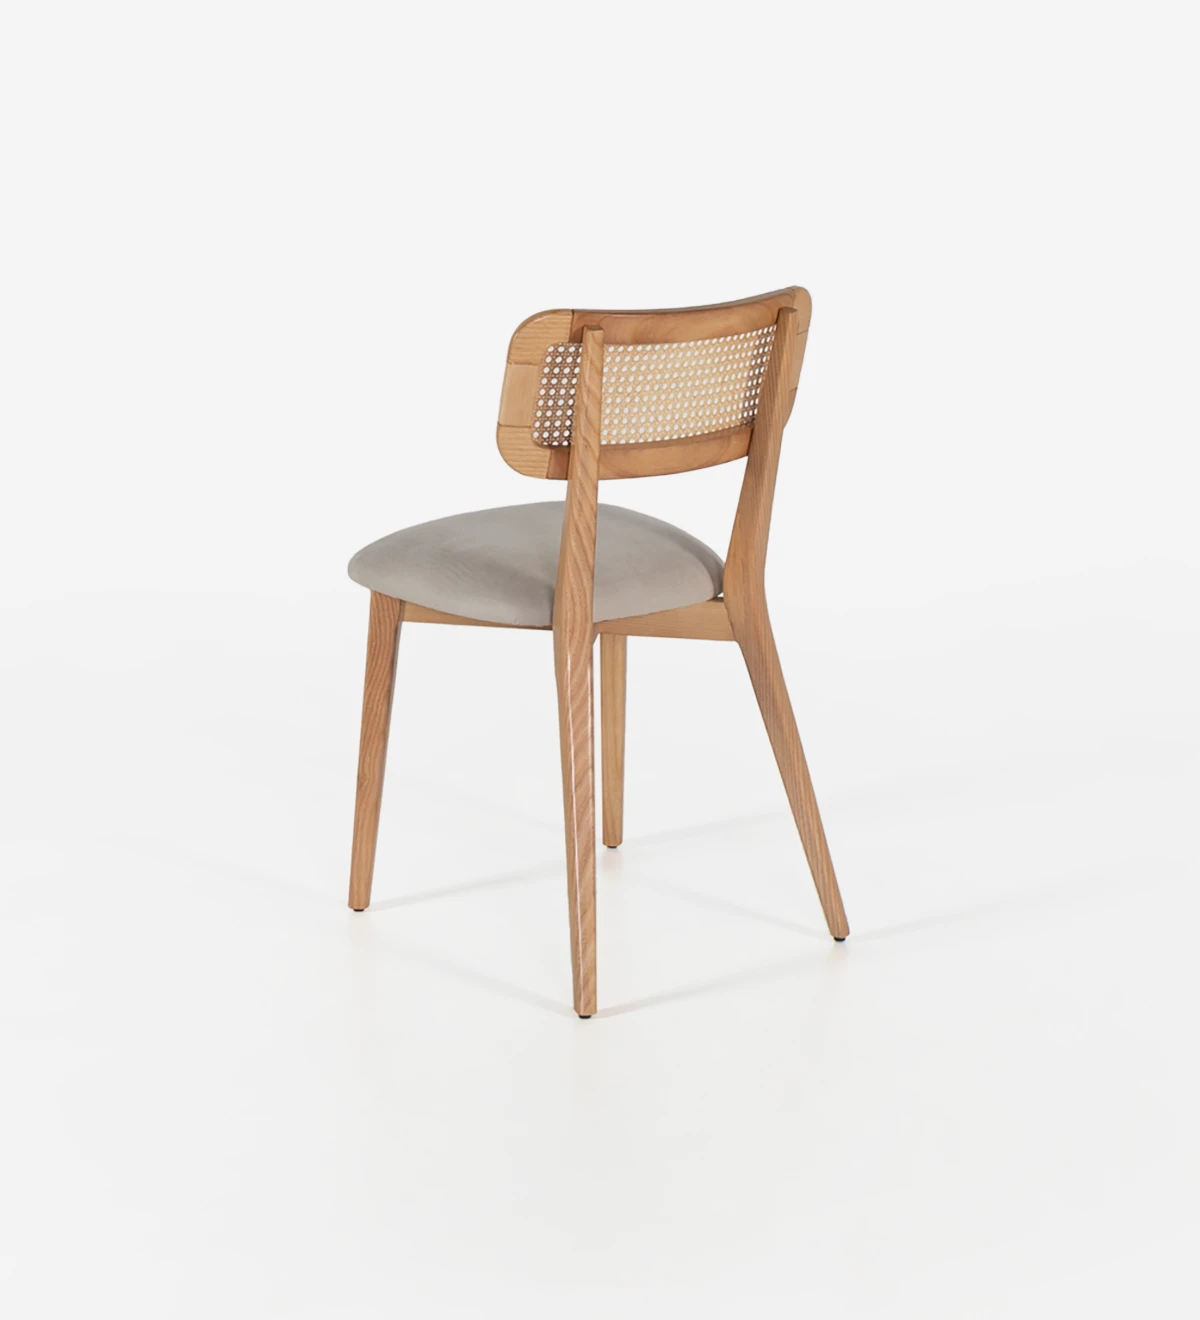 Wood chair, with rattan detail on the back and fabric upholstered seat.